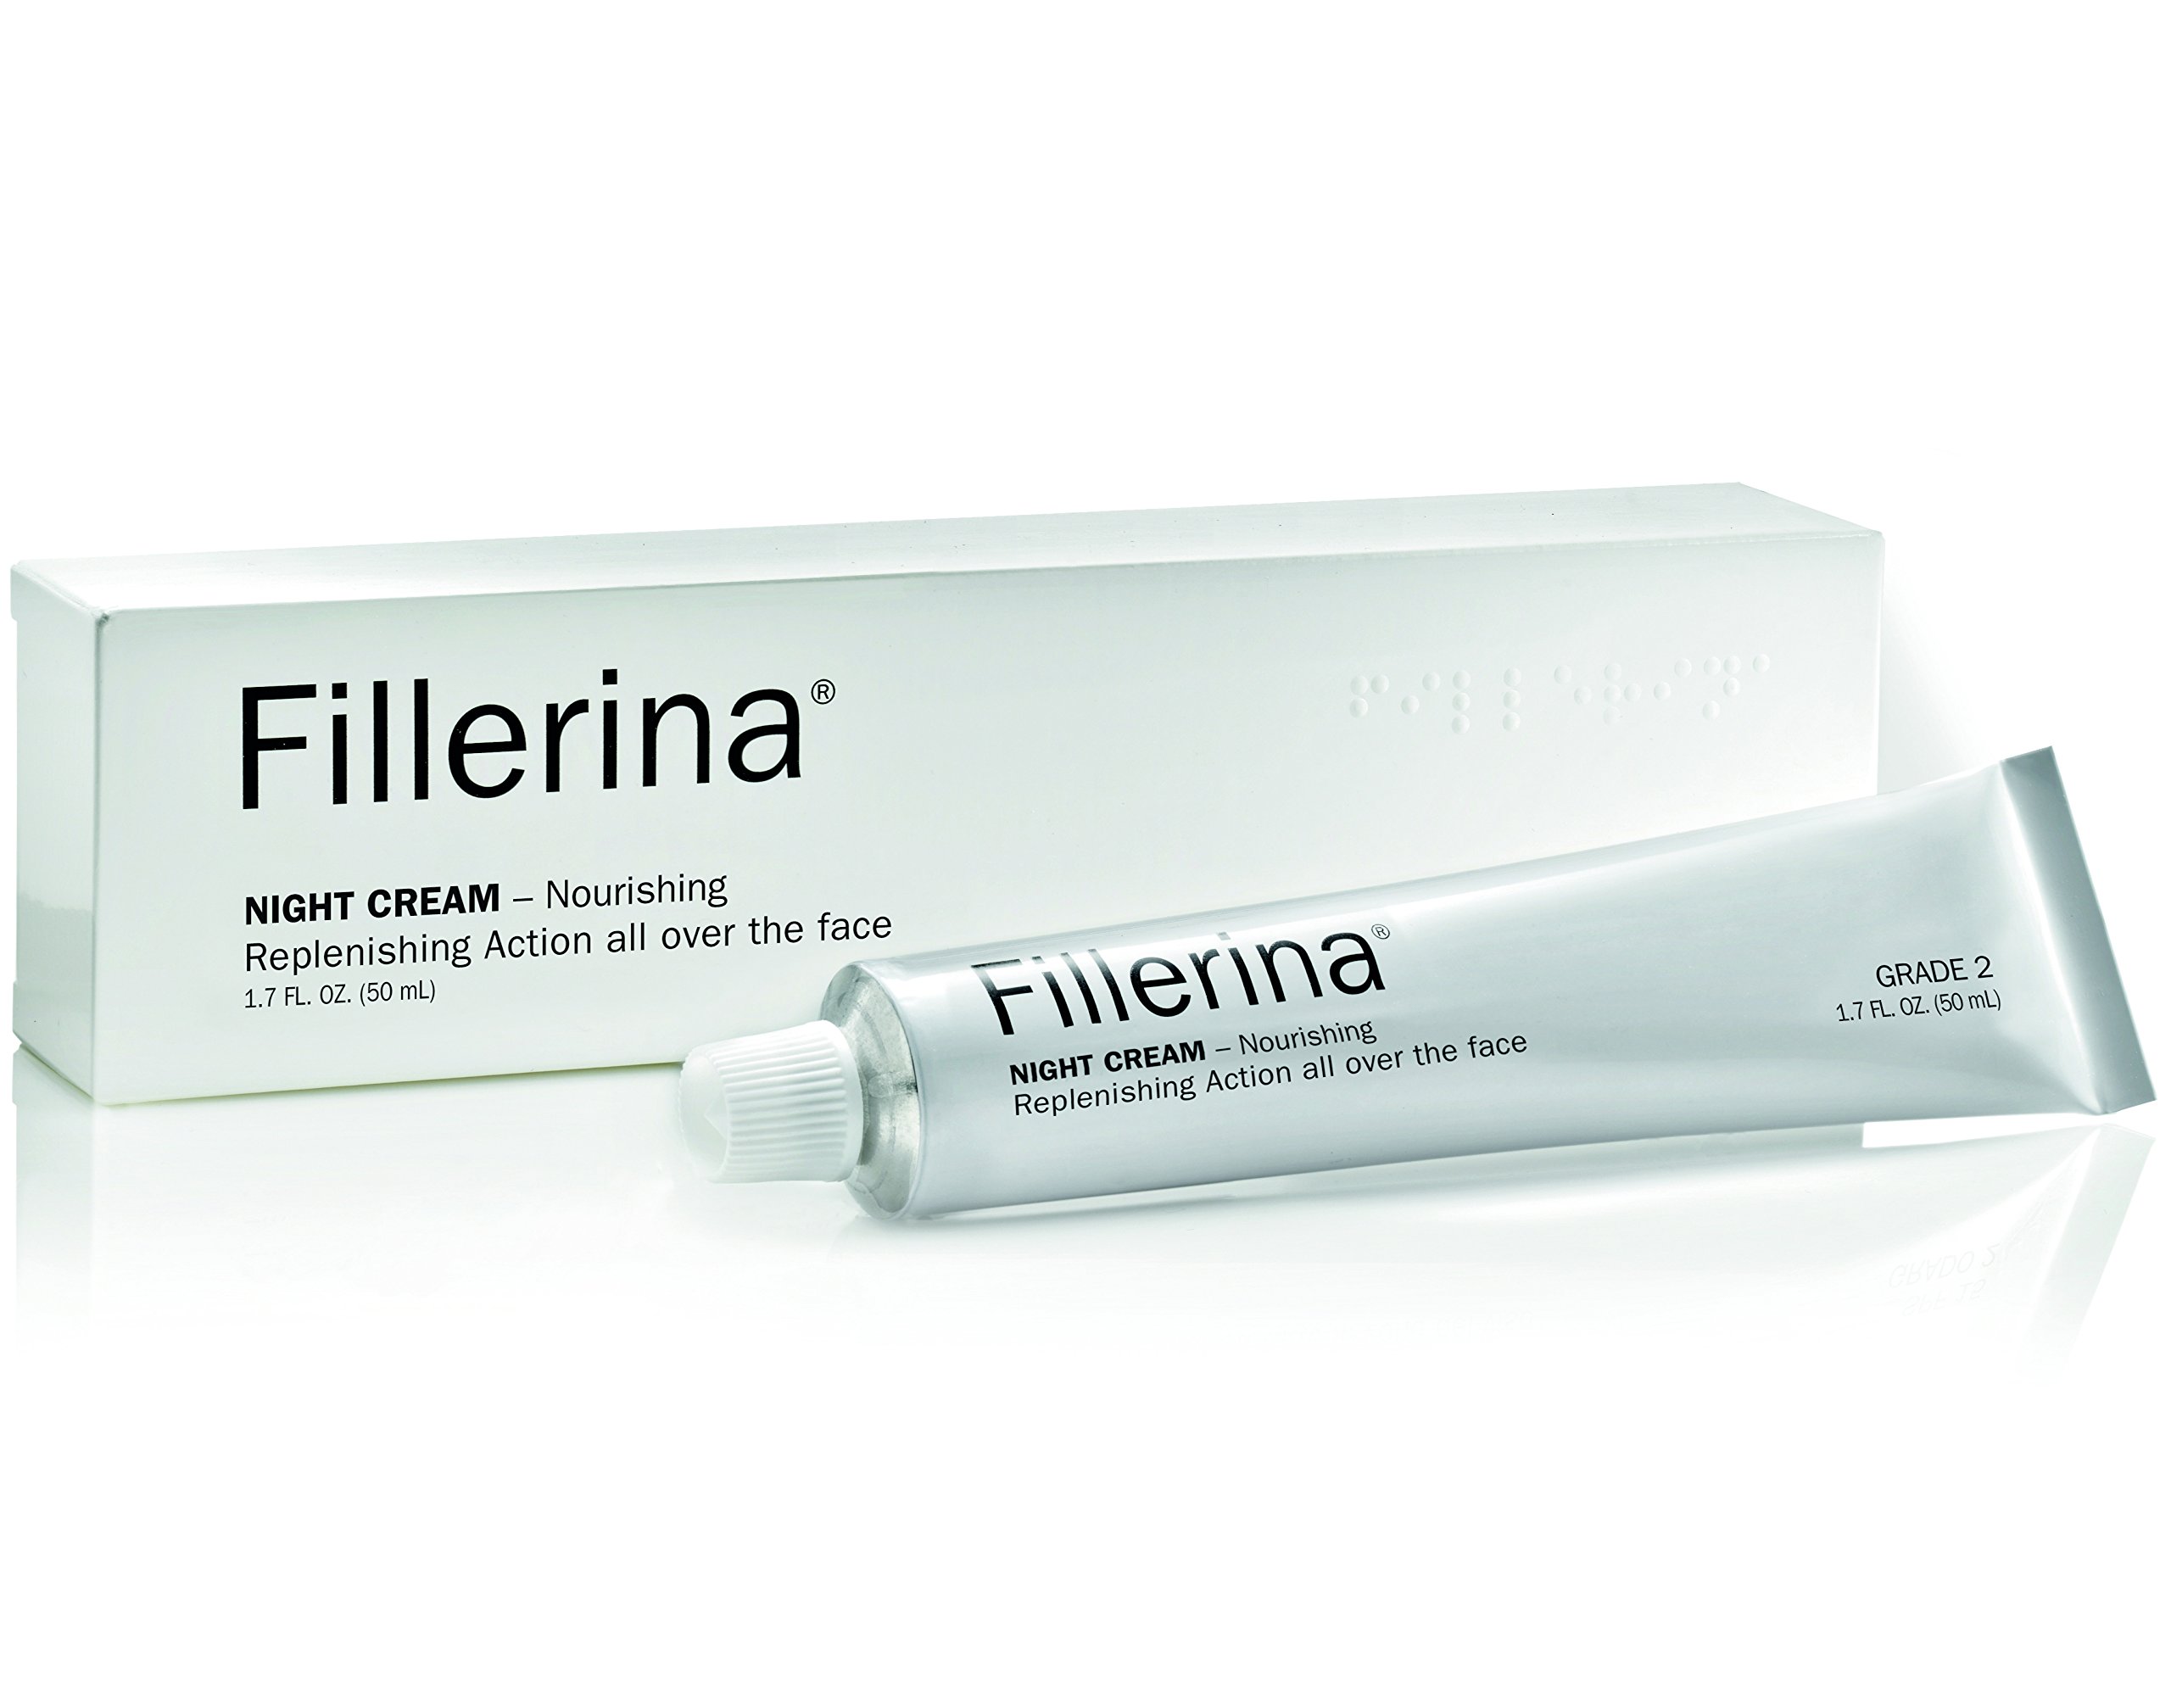 Fillerina Night Cream-Anti Aging Night Cream With Hyaluronic Acid- Deeply Moisturizes and replenishes fine lines and wrinkles. Grade 2 is for Begin...